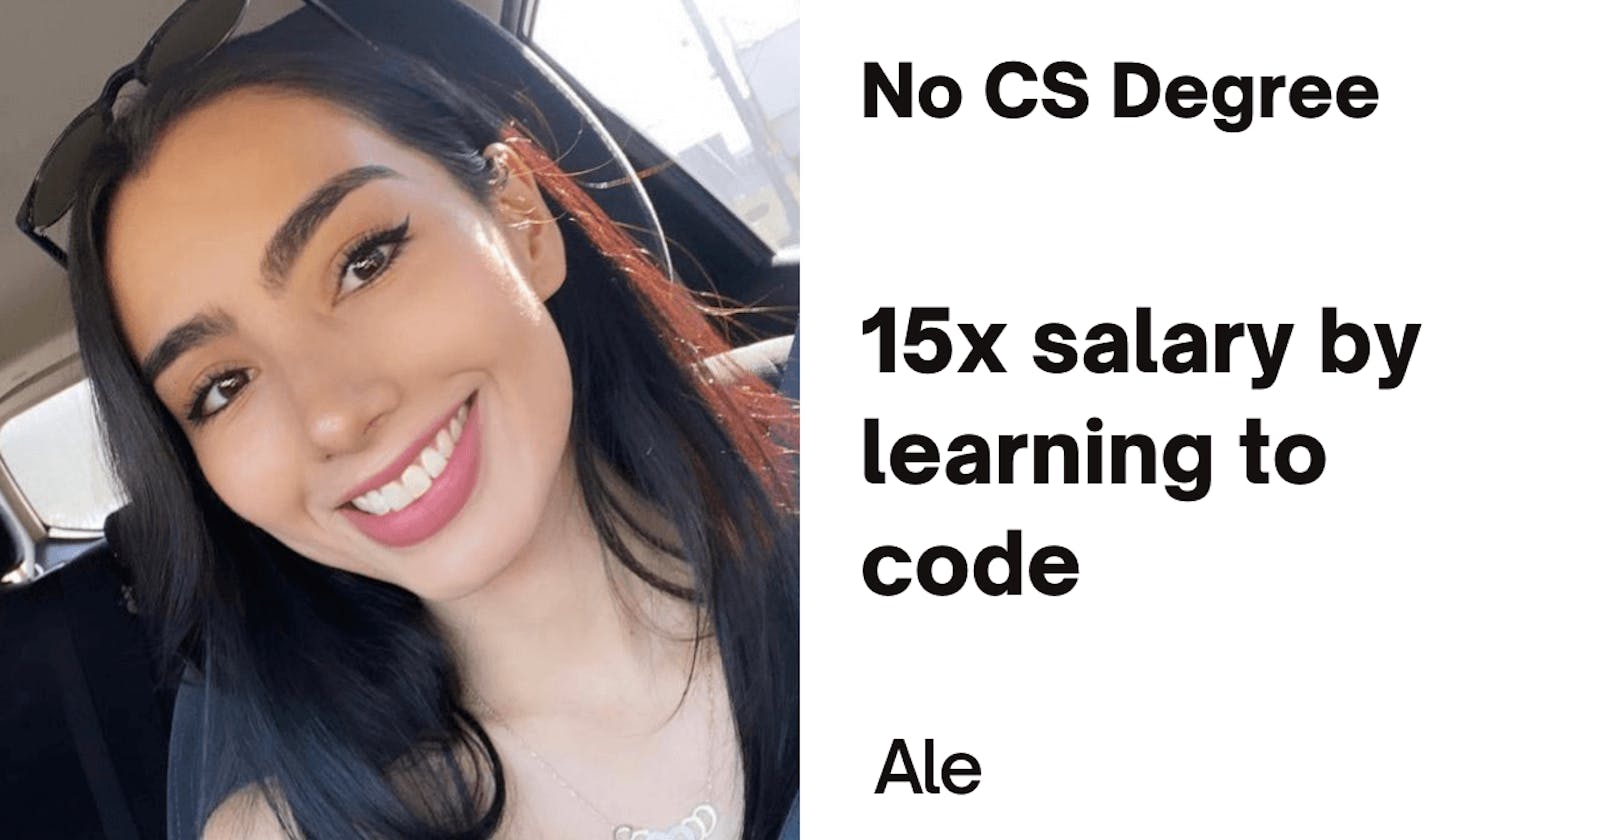 15x Local Graduate Salaries By Learning To Code